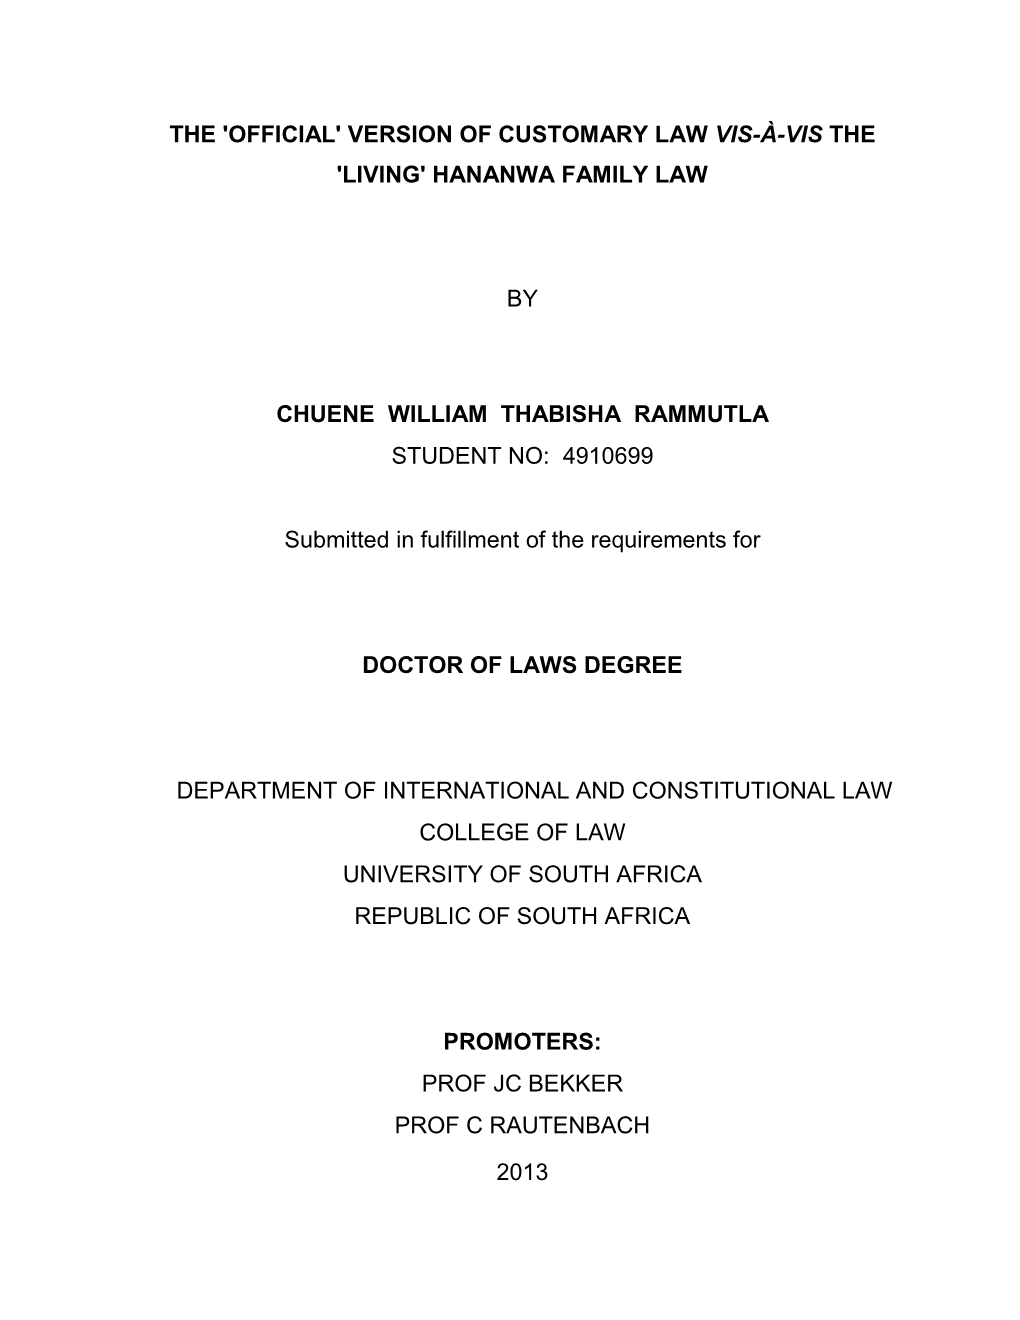 'Official' Version of Customary Law Vis-À-Vis the 'Living' Hananwa Family Law